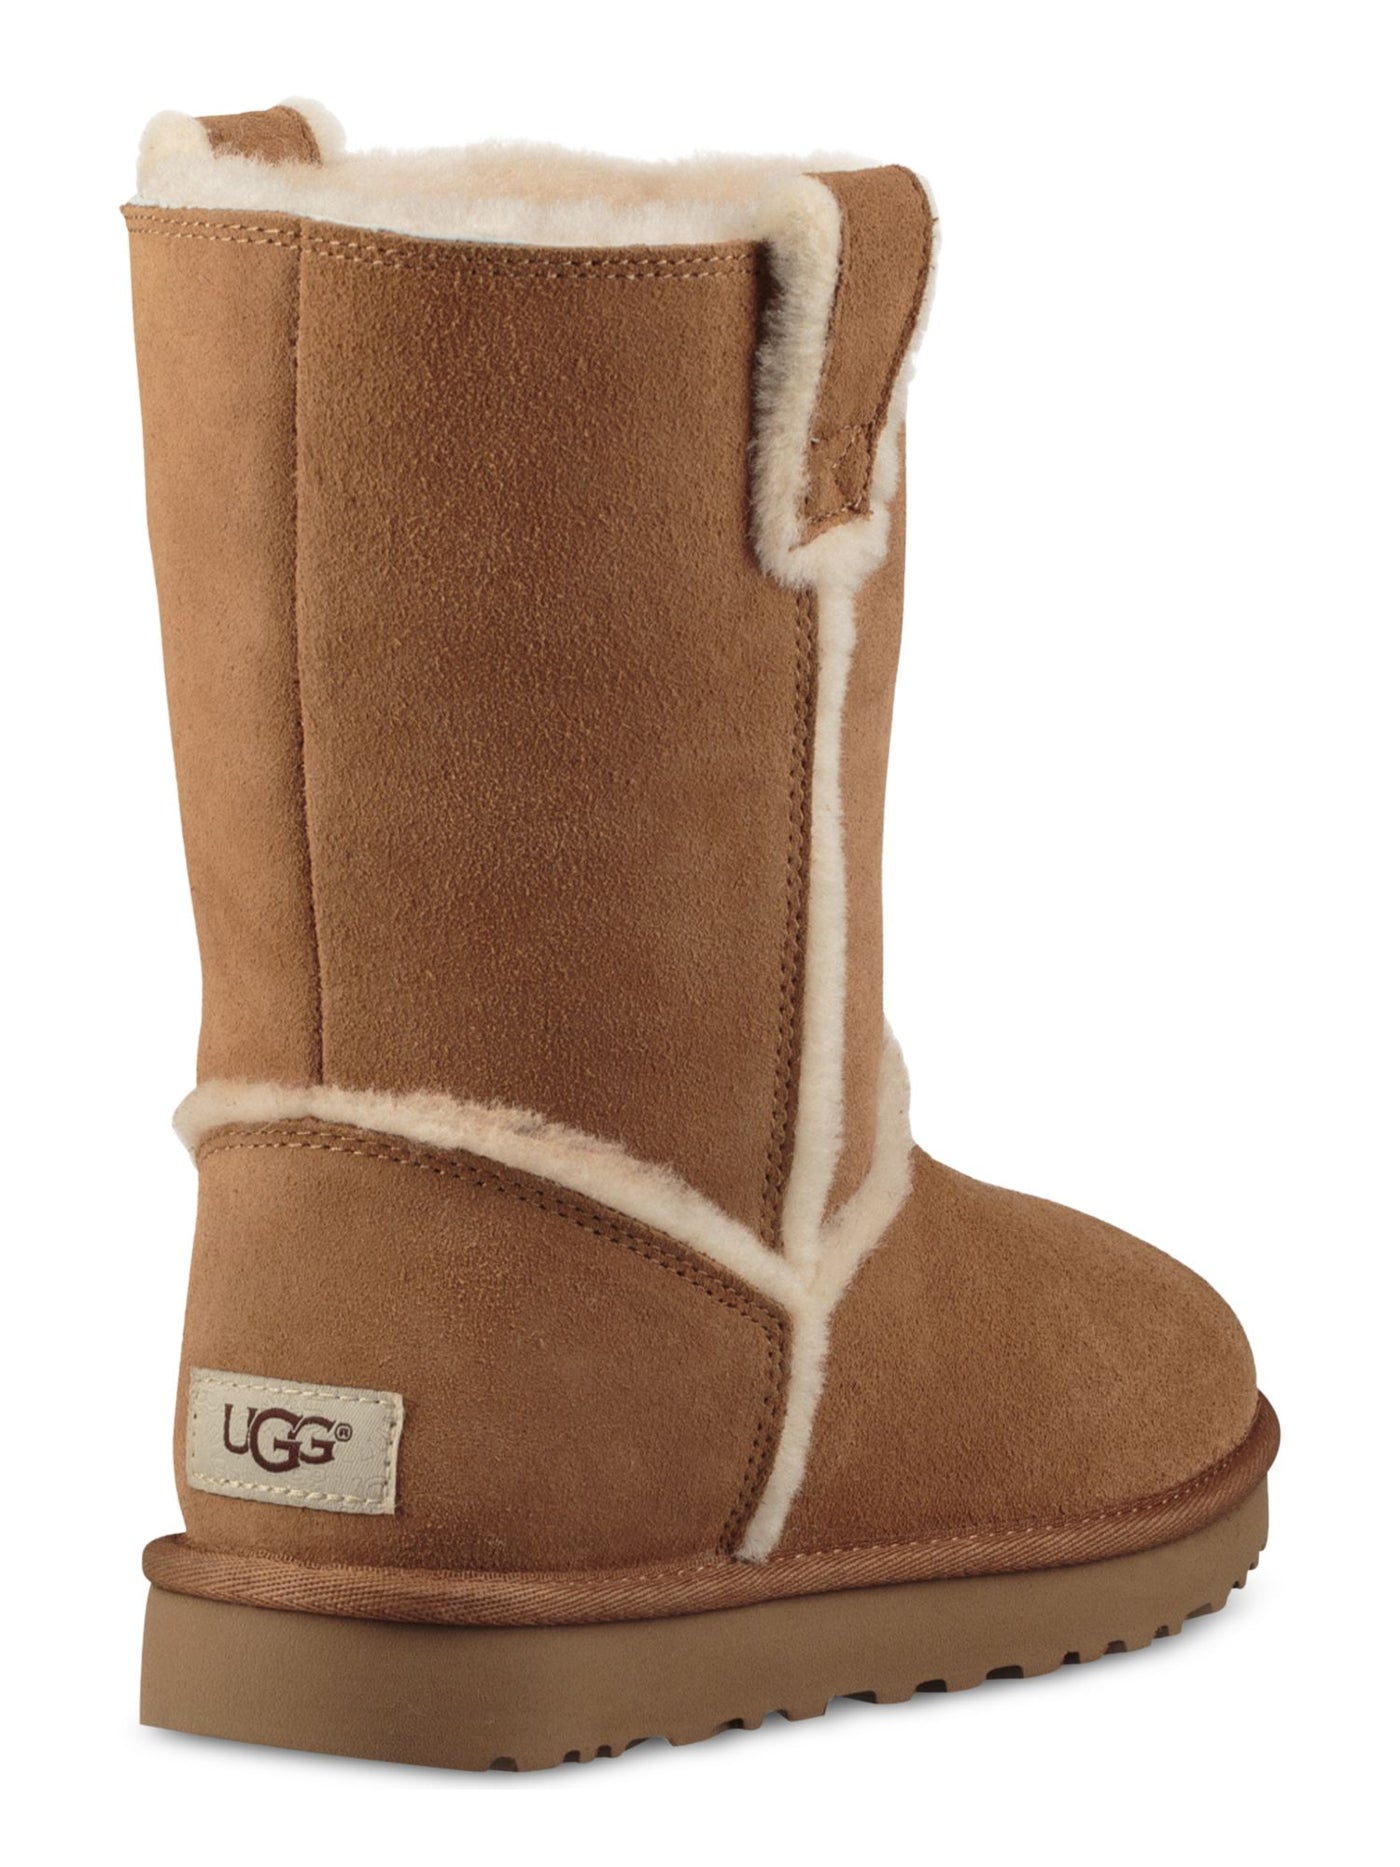 UGG Womens Brown Mixed Media Pull Tabs At Both Sides Padded Classic Short Round Toe Winter Boots 9